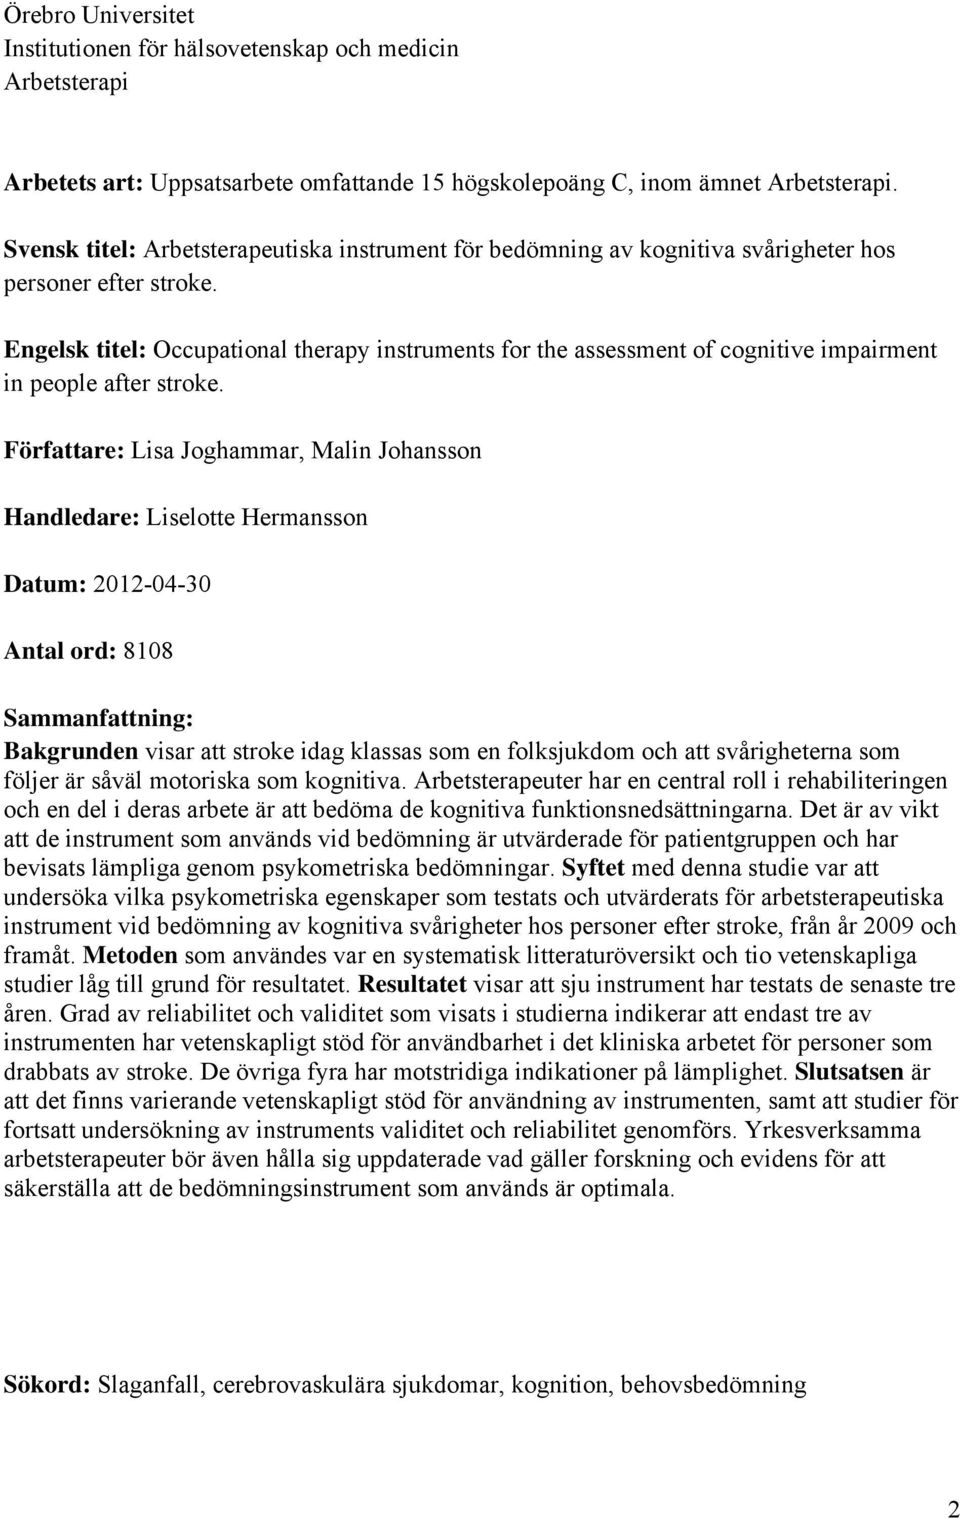 Engelsk titel: Occupational therapy instruments for the assessment of cognitive impairment in people after stroke.